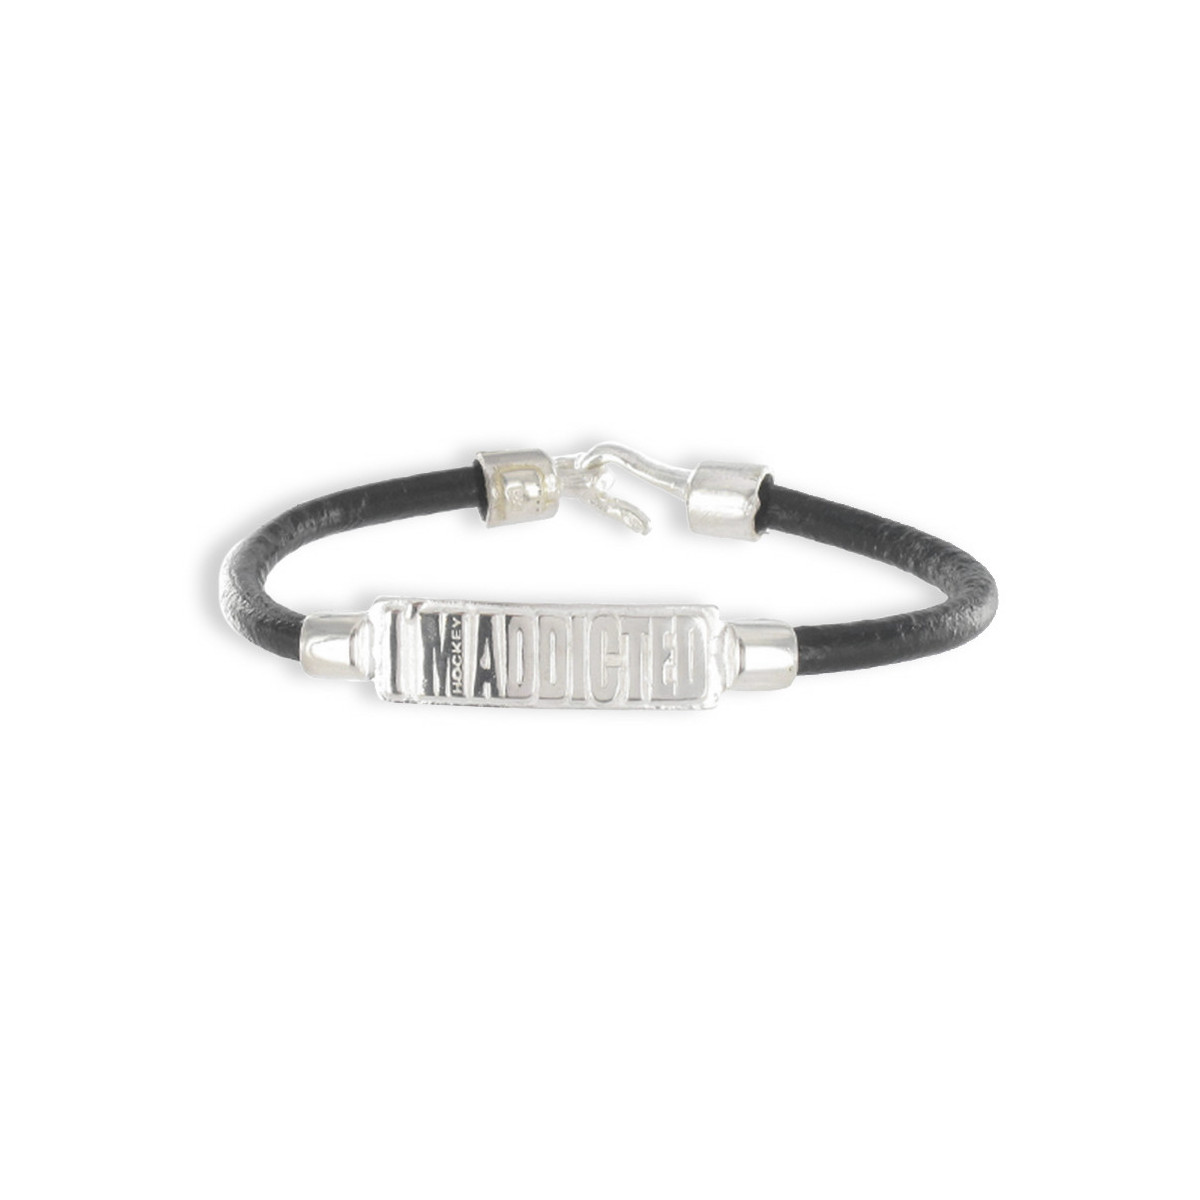 LEATHER AND SILVER I'M ADDICTED BRACELET